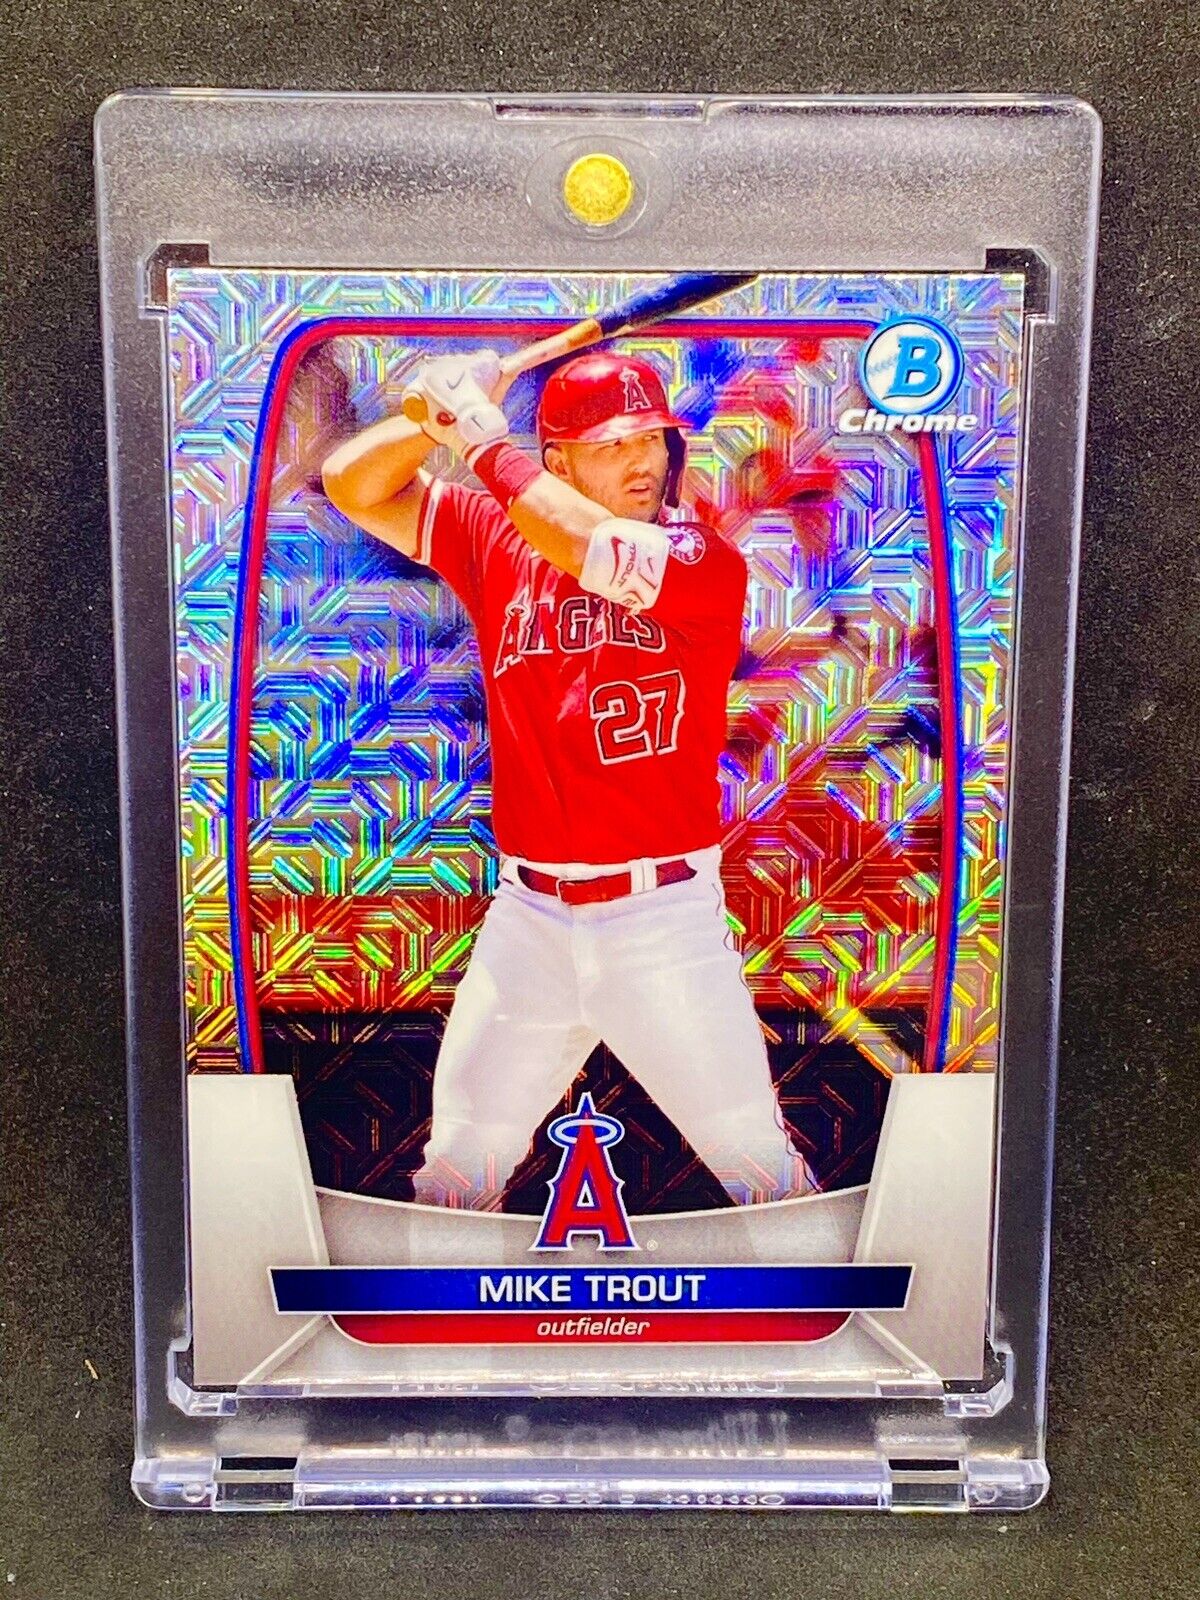 Mike Trout RARE MOJO REFRACTOR INVESTMENT CARD SSP TOPPS ANGELS MVP MINT